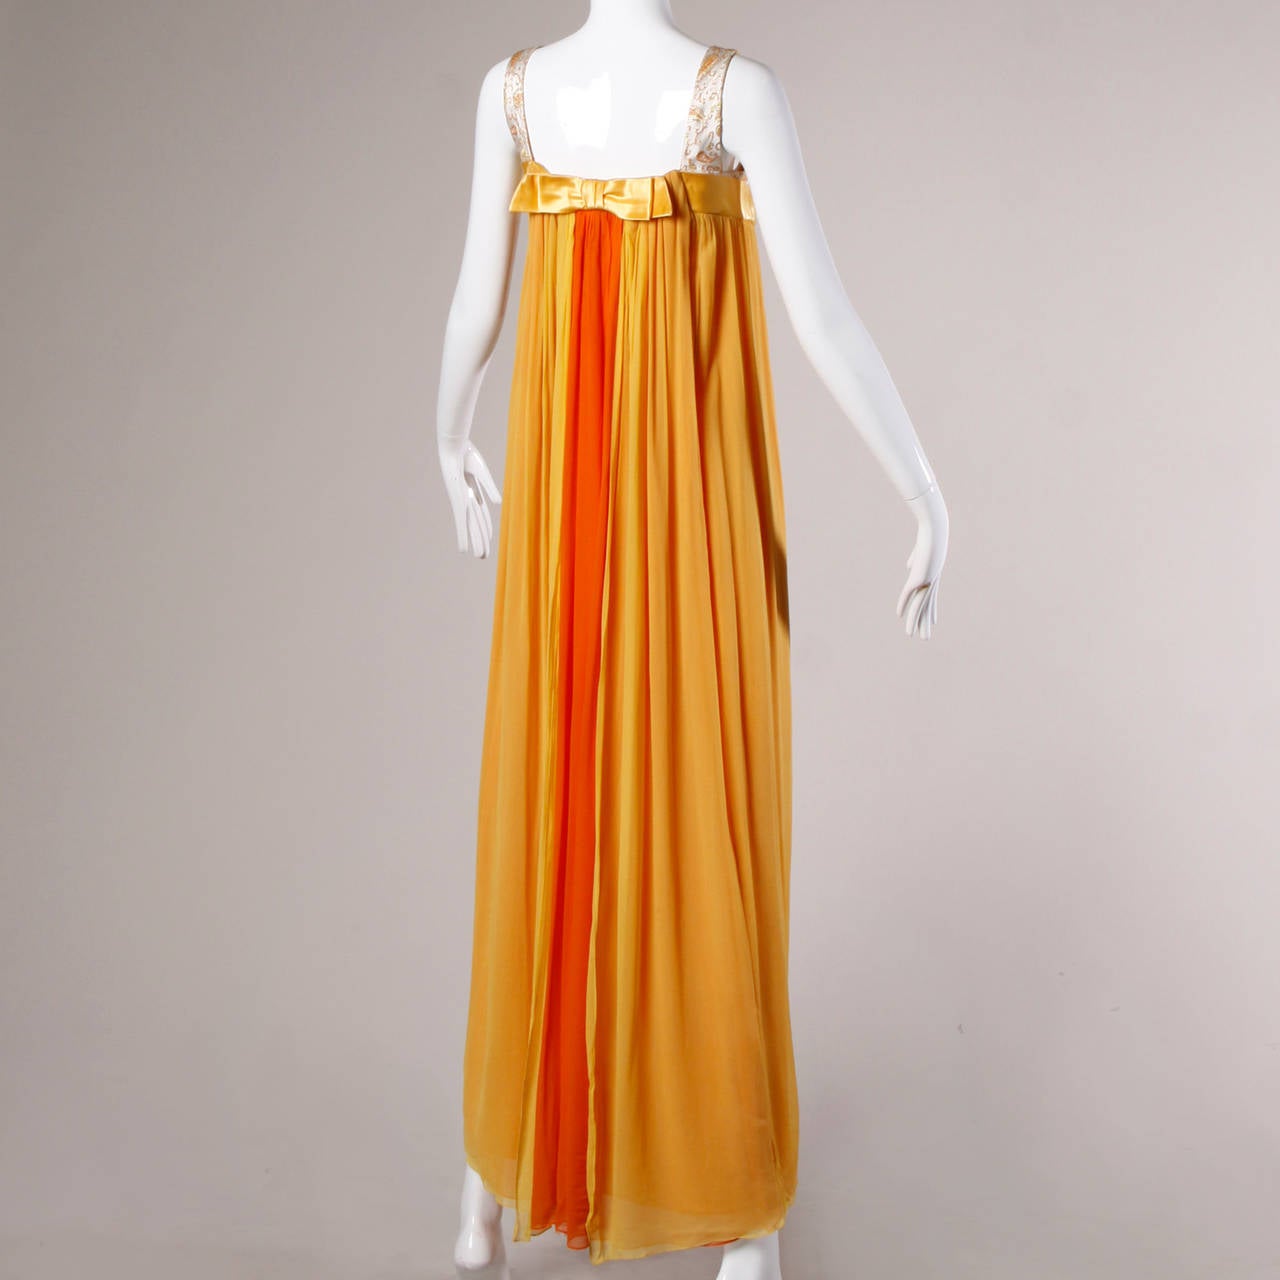 Vintage 1960s maxi dress in layers of citrus colored silk chiffon. Empire waist and back train.

Details:

Partially Lined
Back Metal Zip and Hook Closure
Marked Size: Not Marked
Estimated Size: Small
Color: Bright Orange/ Bright